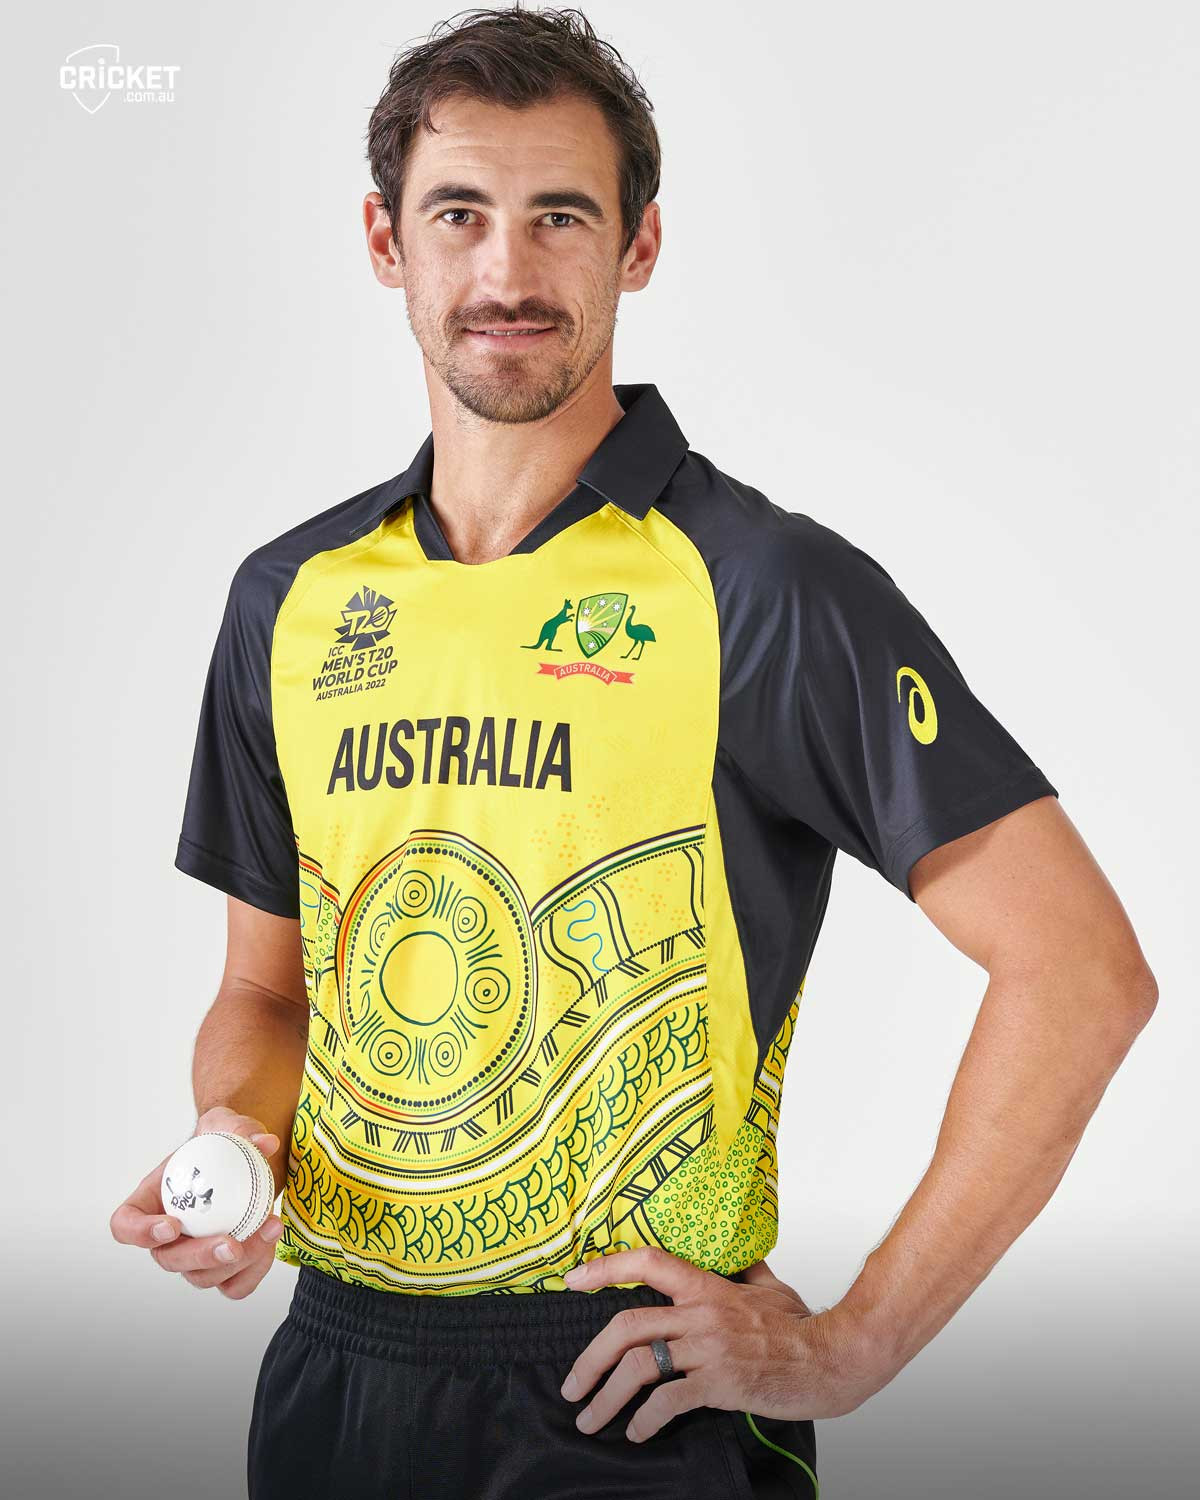 The Australian team will wear a shirt with indigenous designs at the T20 World Cup ©Cricket Australia